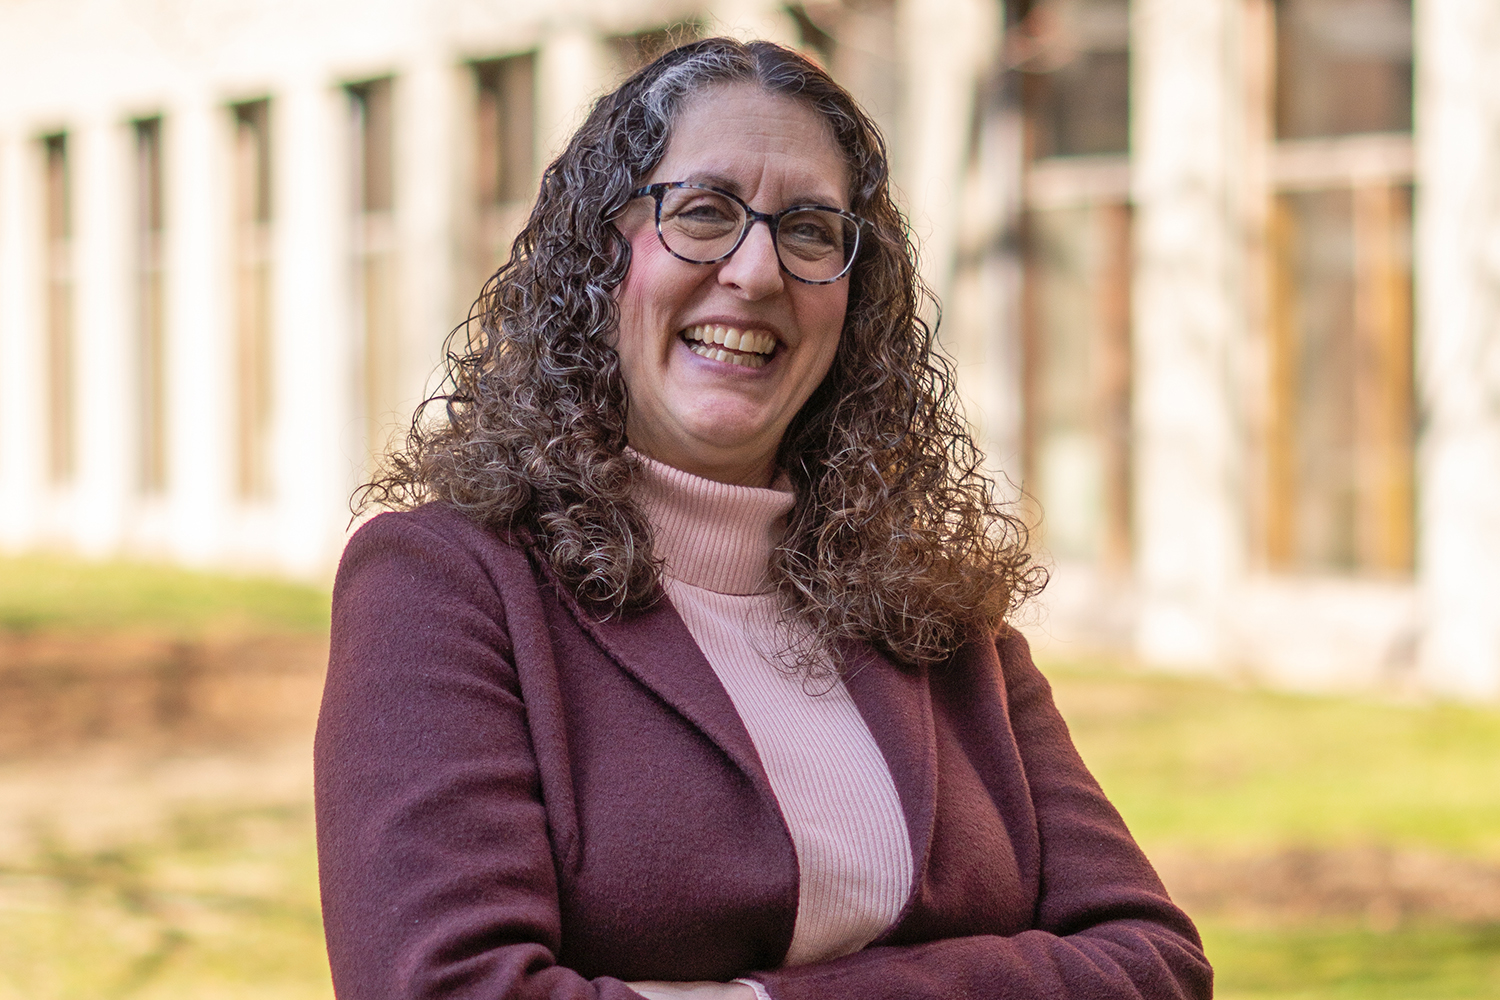 For Julie Greenberg, a career of research, mentoring, and advocacy